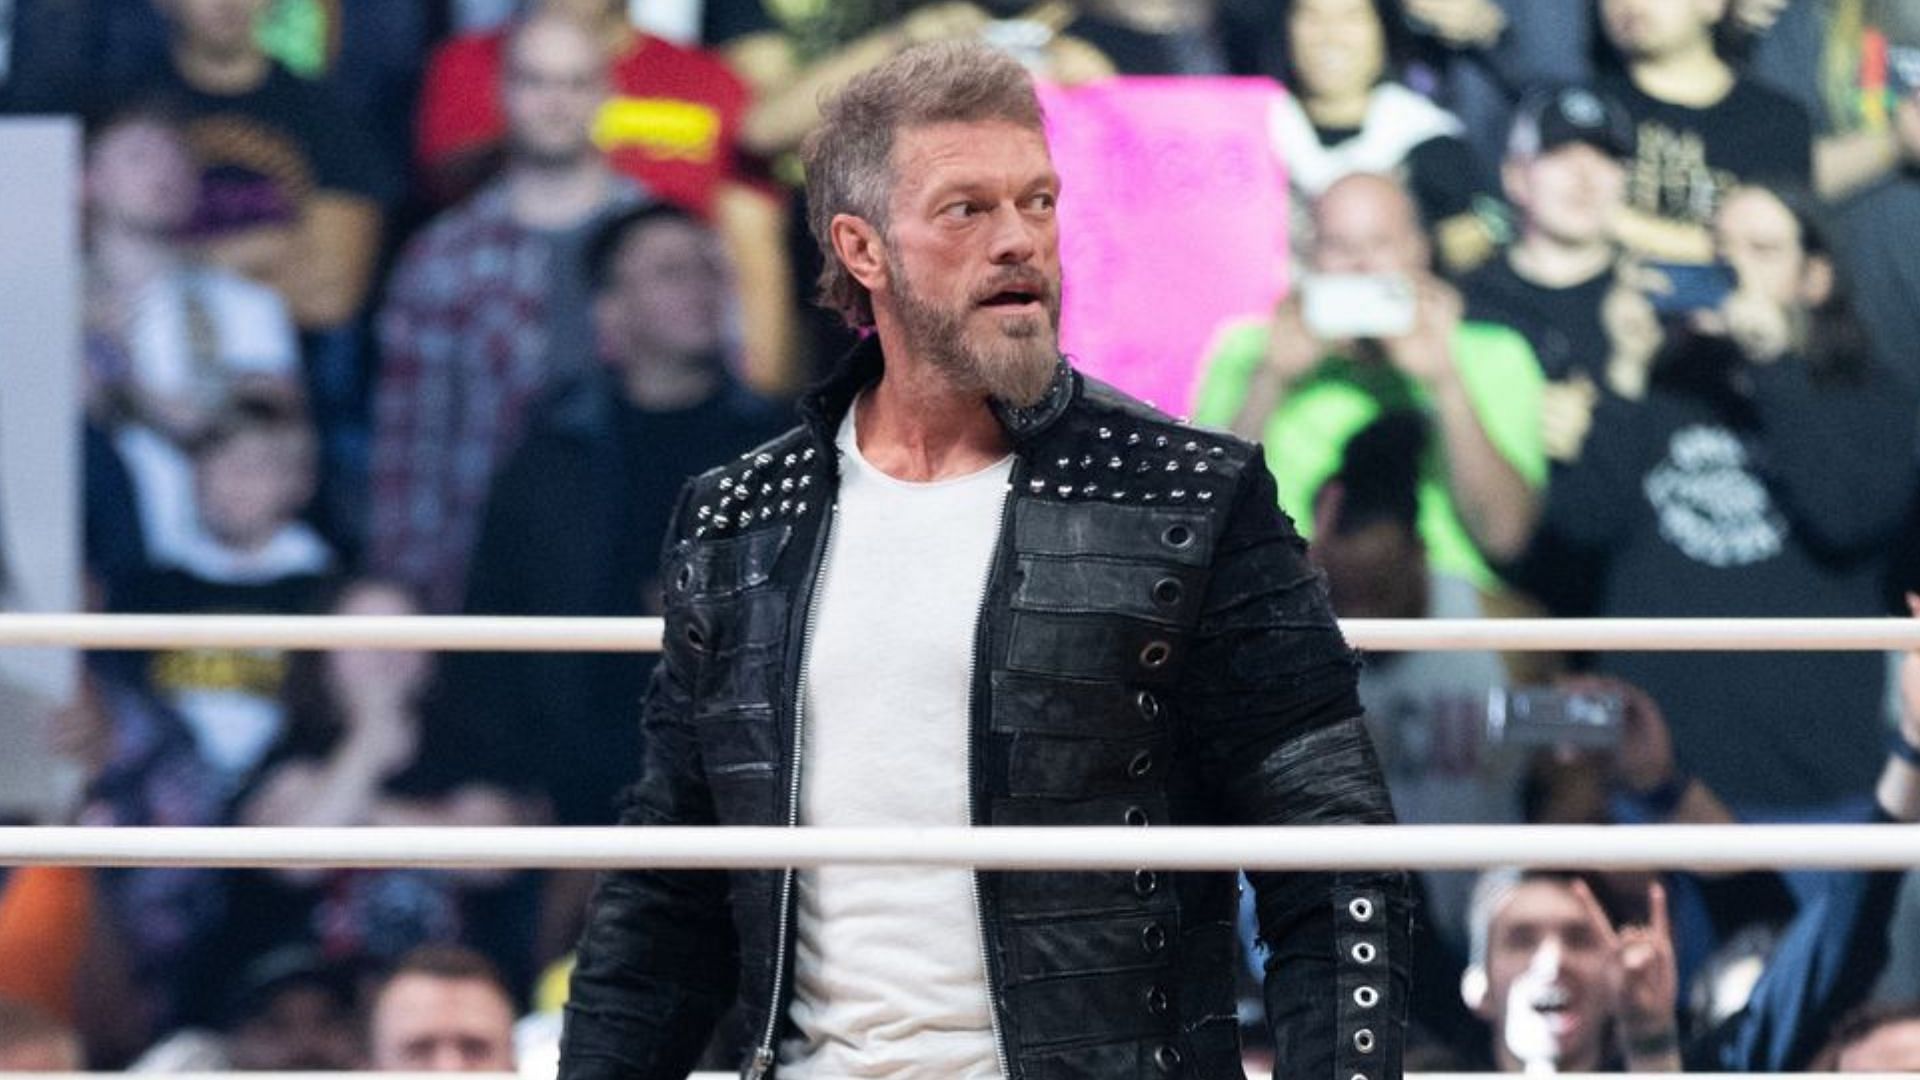 Edge was one of the top stars in WWE